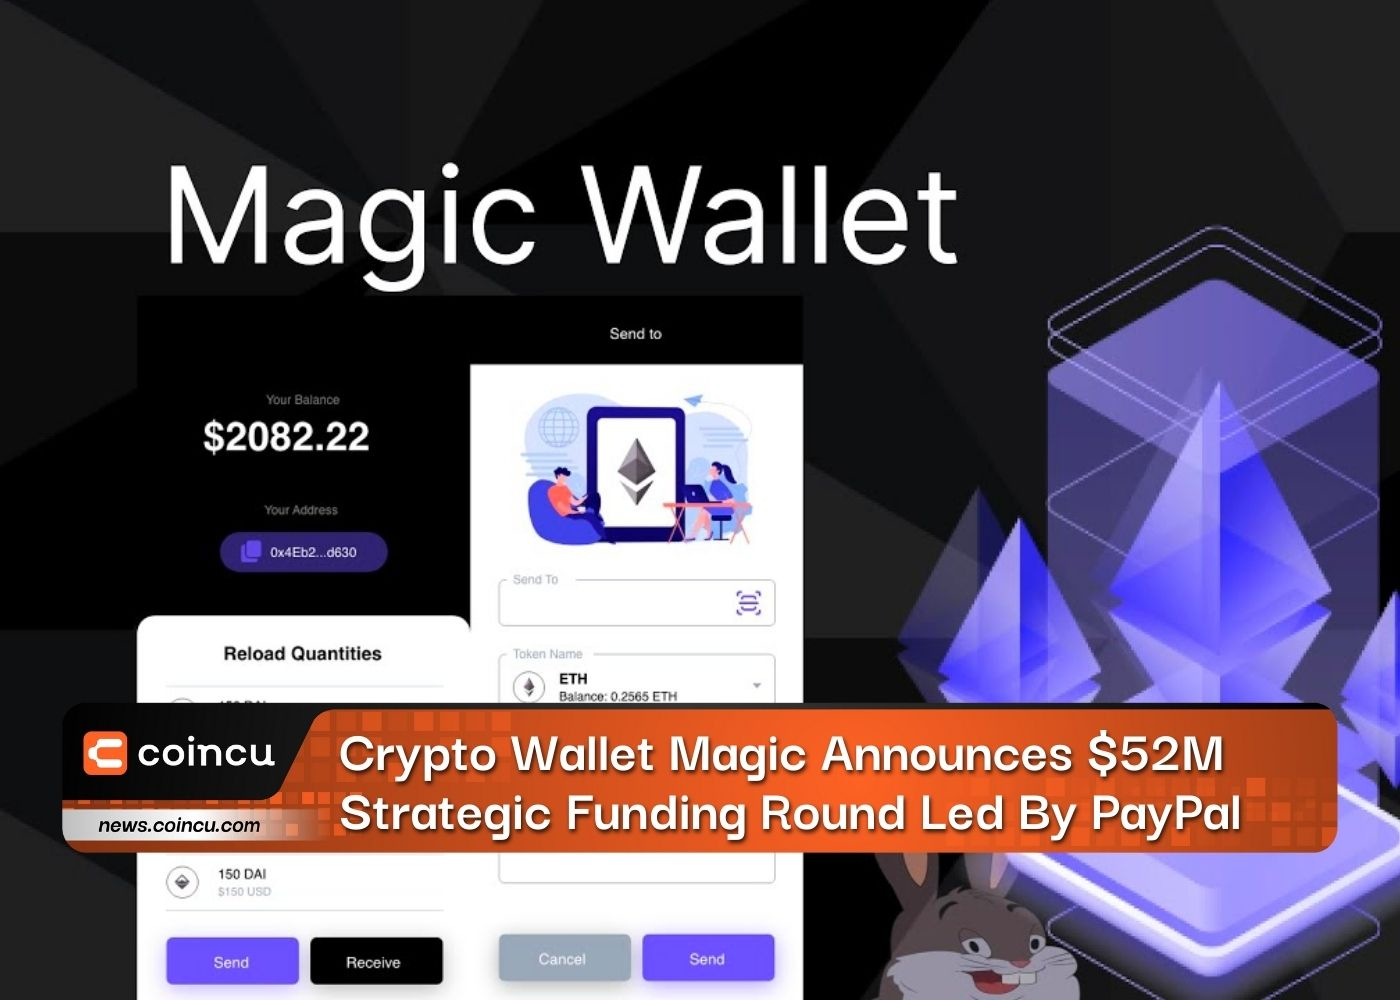 Crypto Wallet Magic Announces $52M Strategic Funding Round Led By PayPal